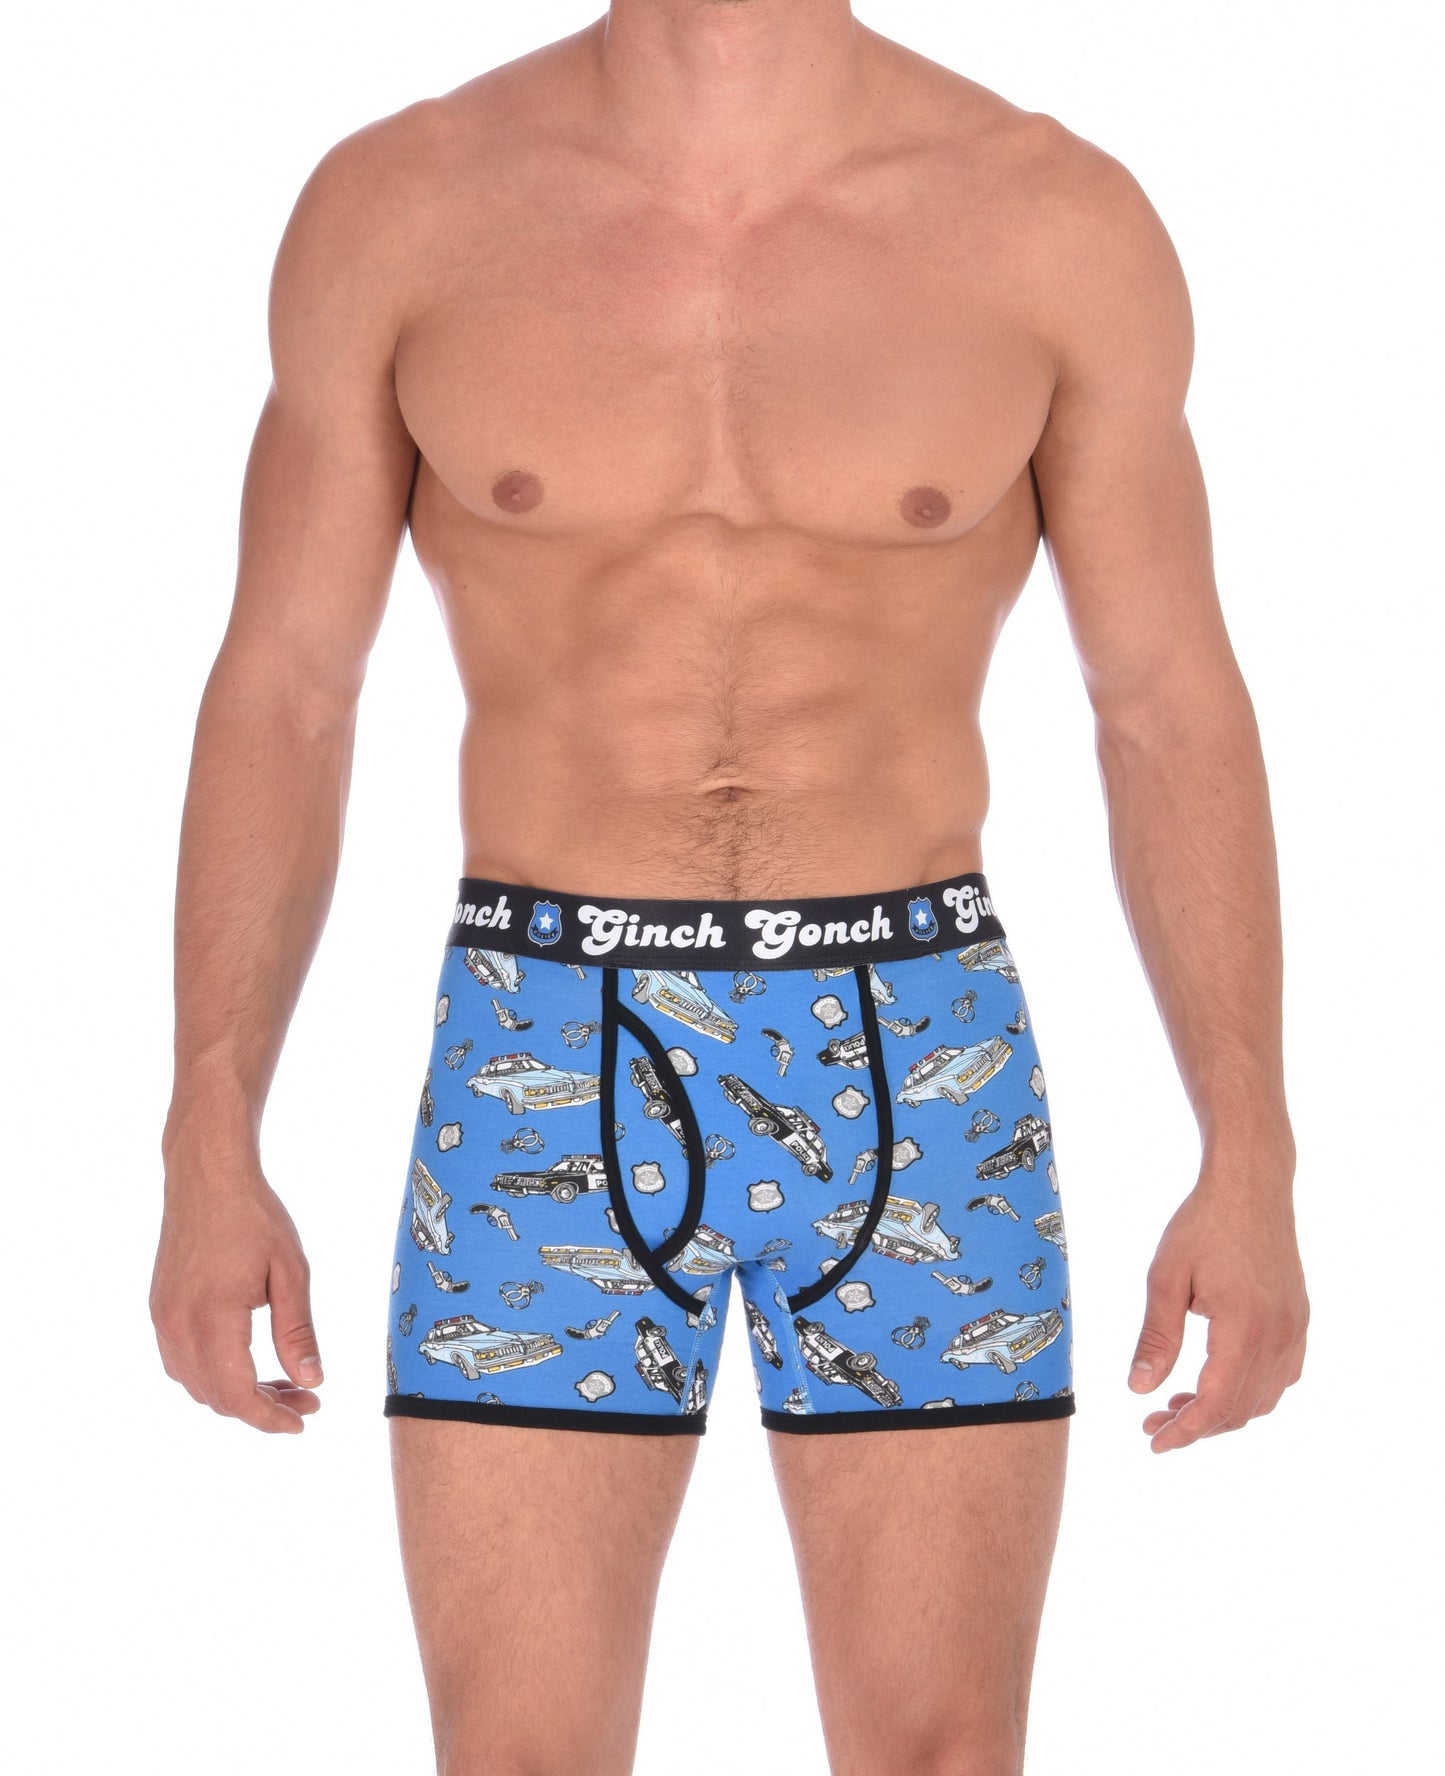 Ginch GonchGG Patrol Boxer Brief trunk men's underwear blue fabric with cop cars, badges, hand cuffs, and guns. Black trim and black printed waistband front. 